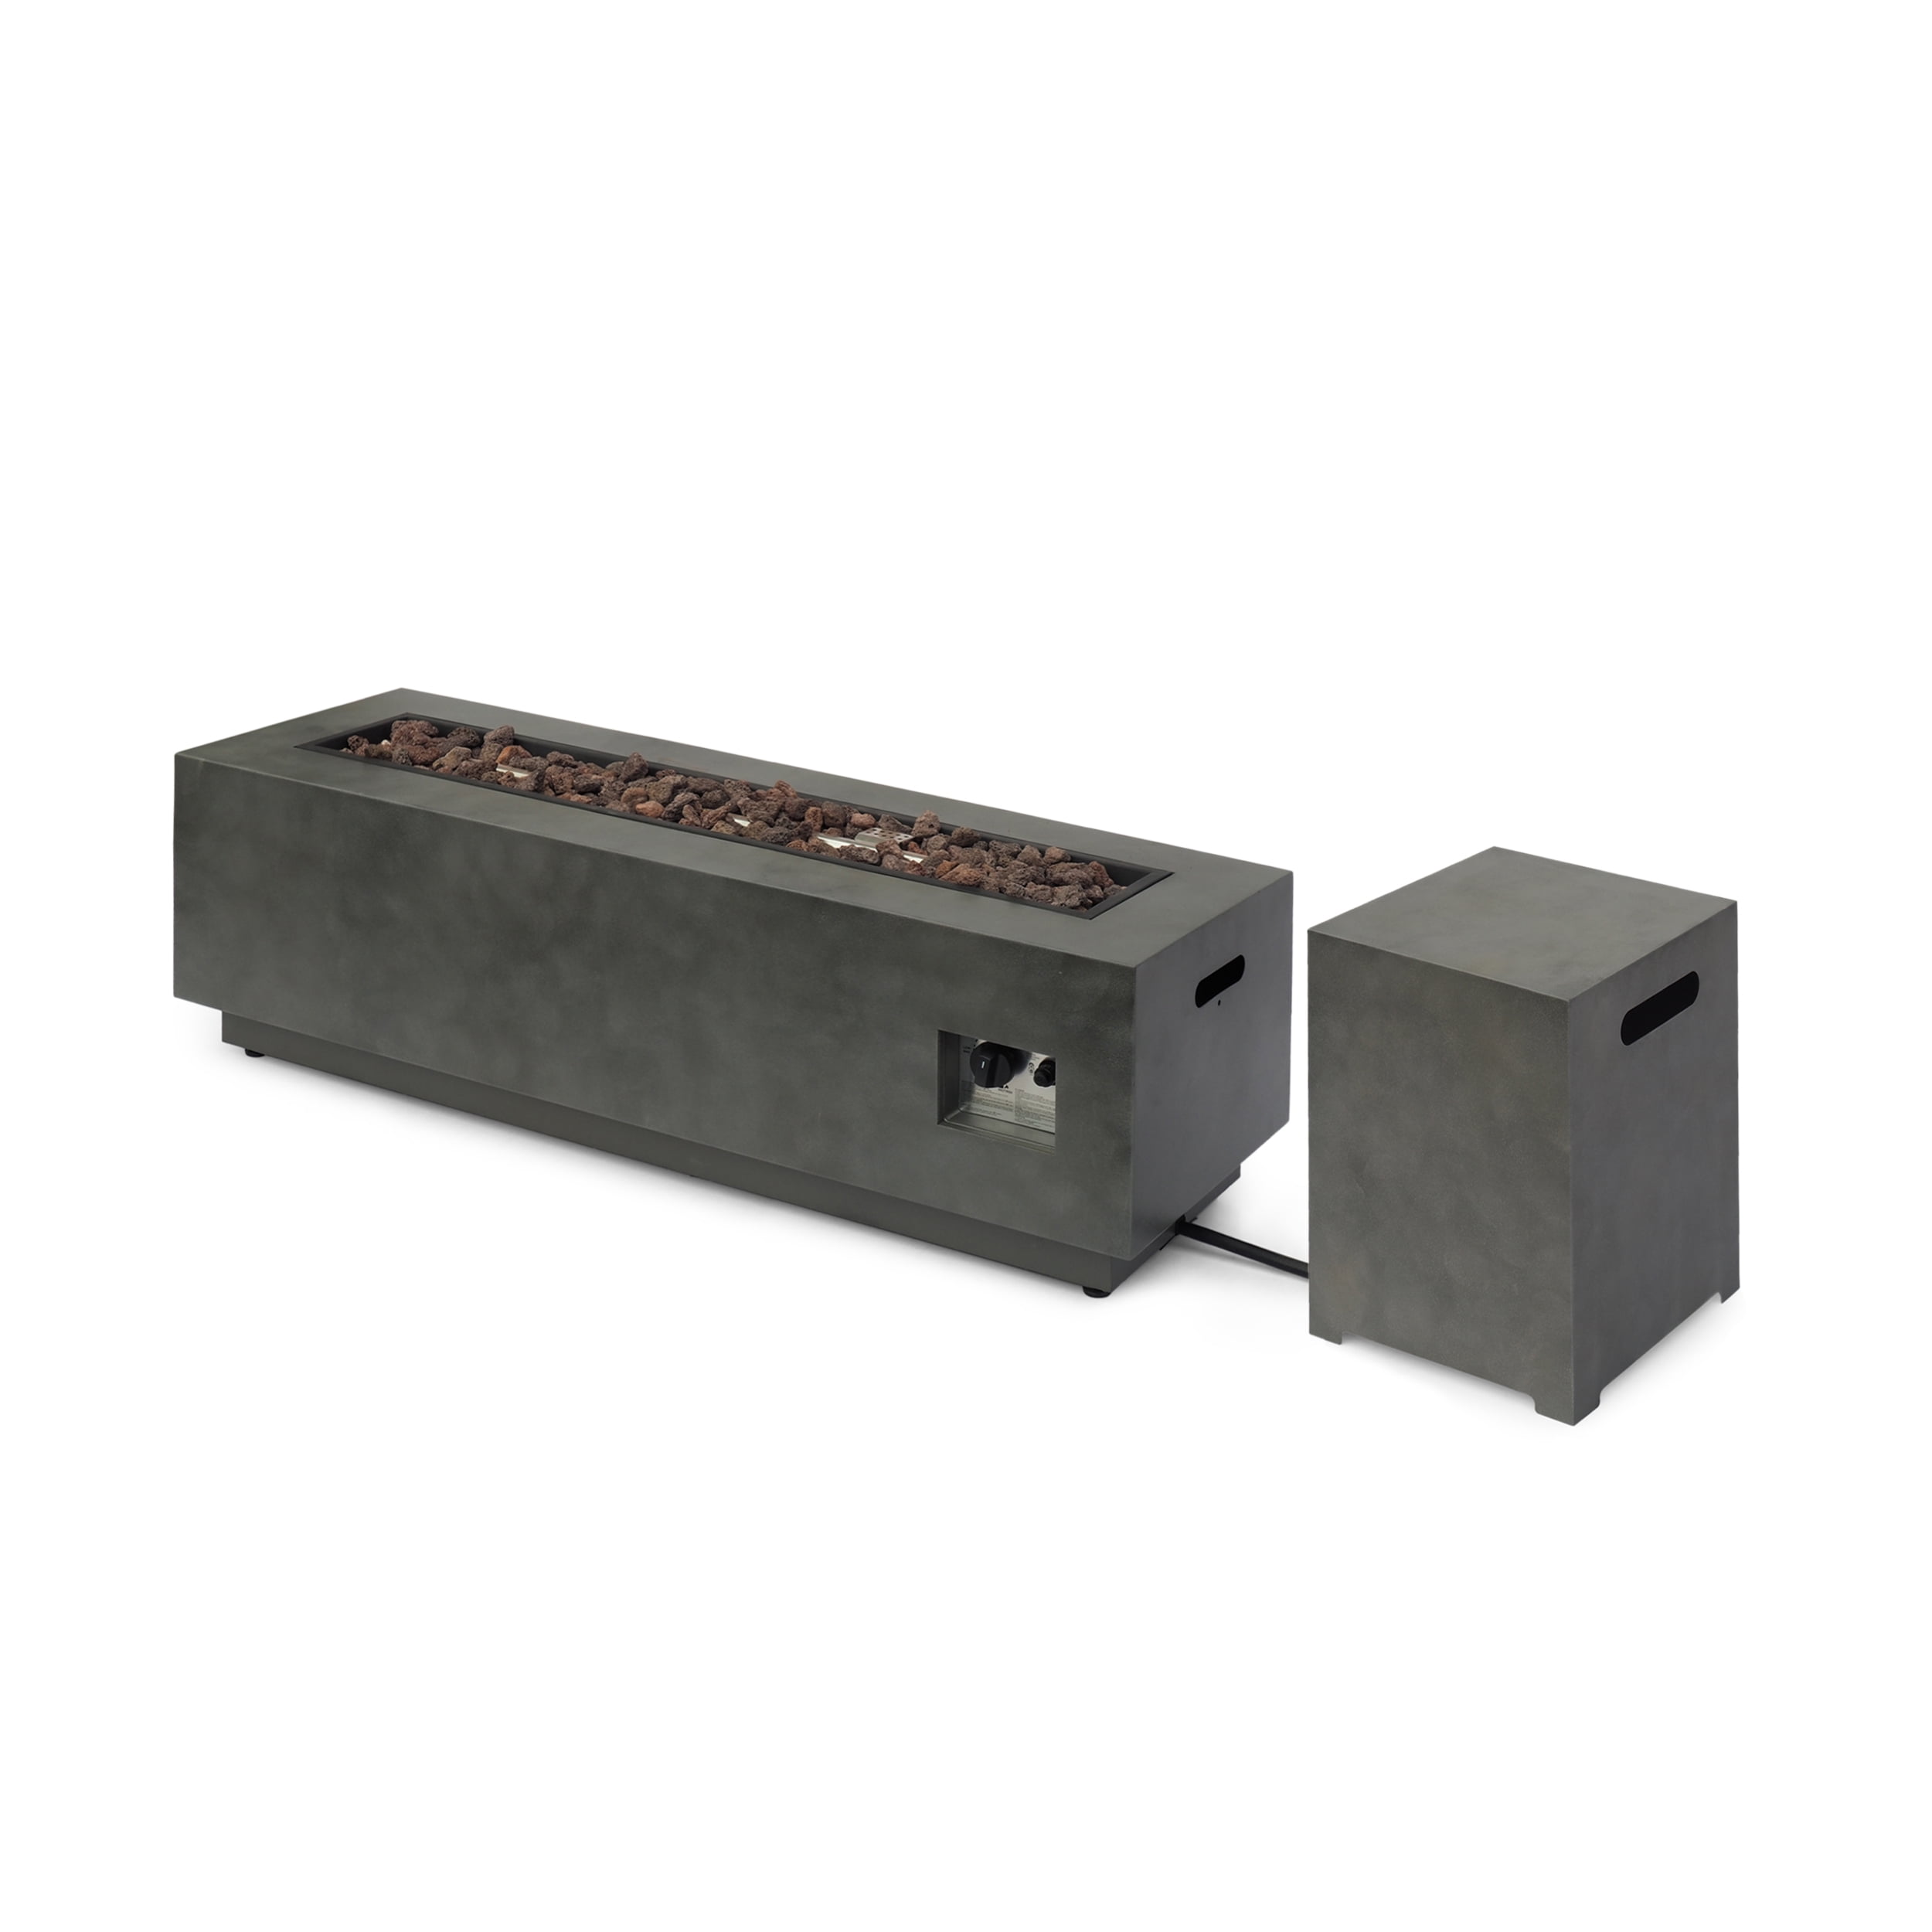 Jefferson Outdoor Rectangular Fire Pit, Halsted Fire Pit